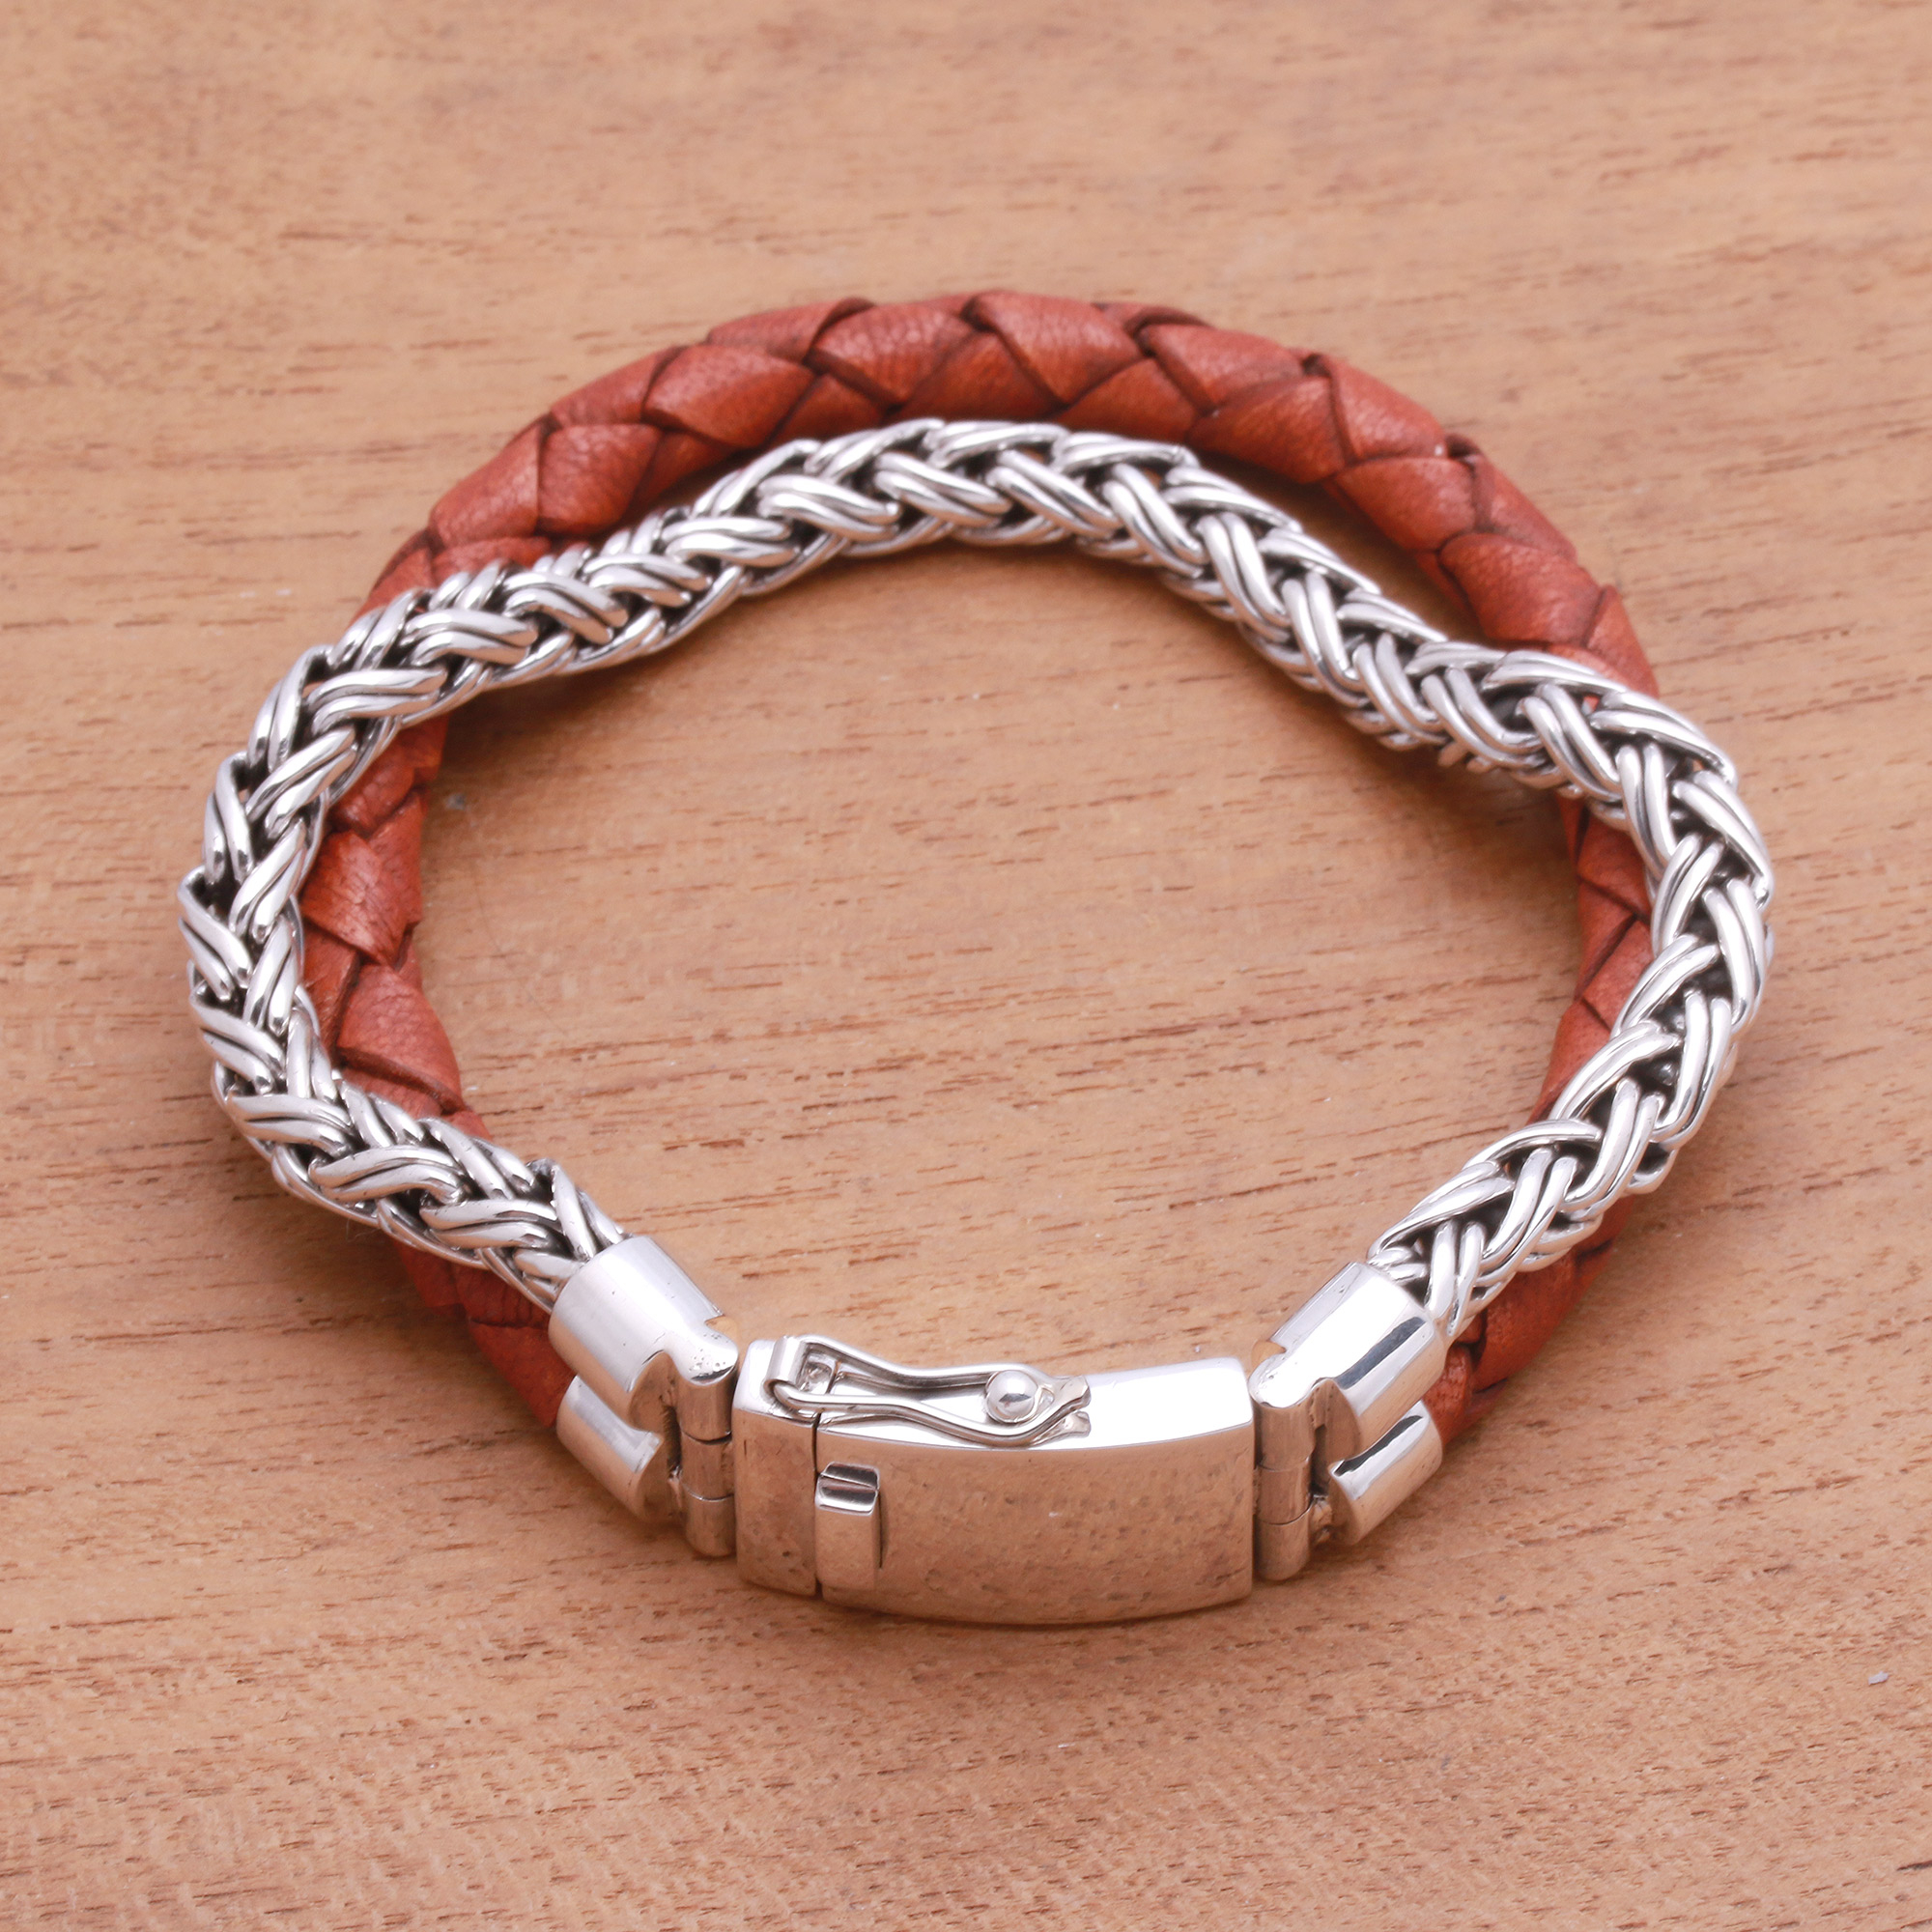 92.5 Silver Lion Head With Ring Clasp Braided Leather Bracelet For